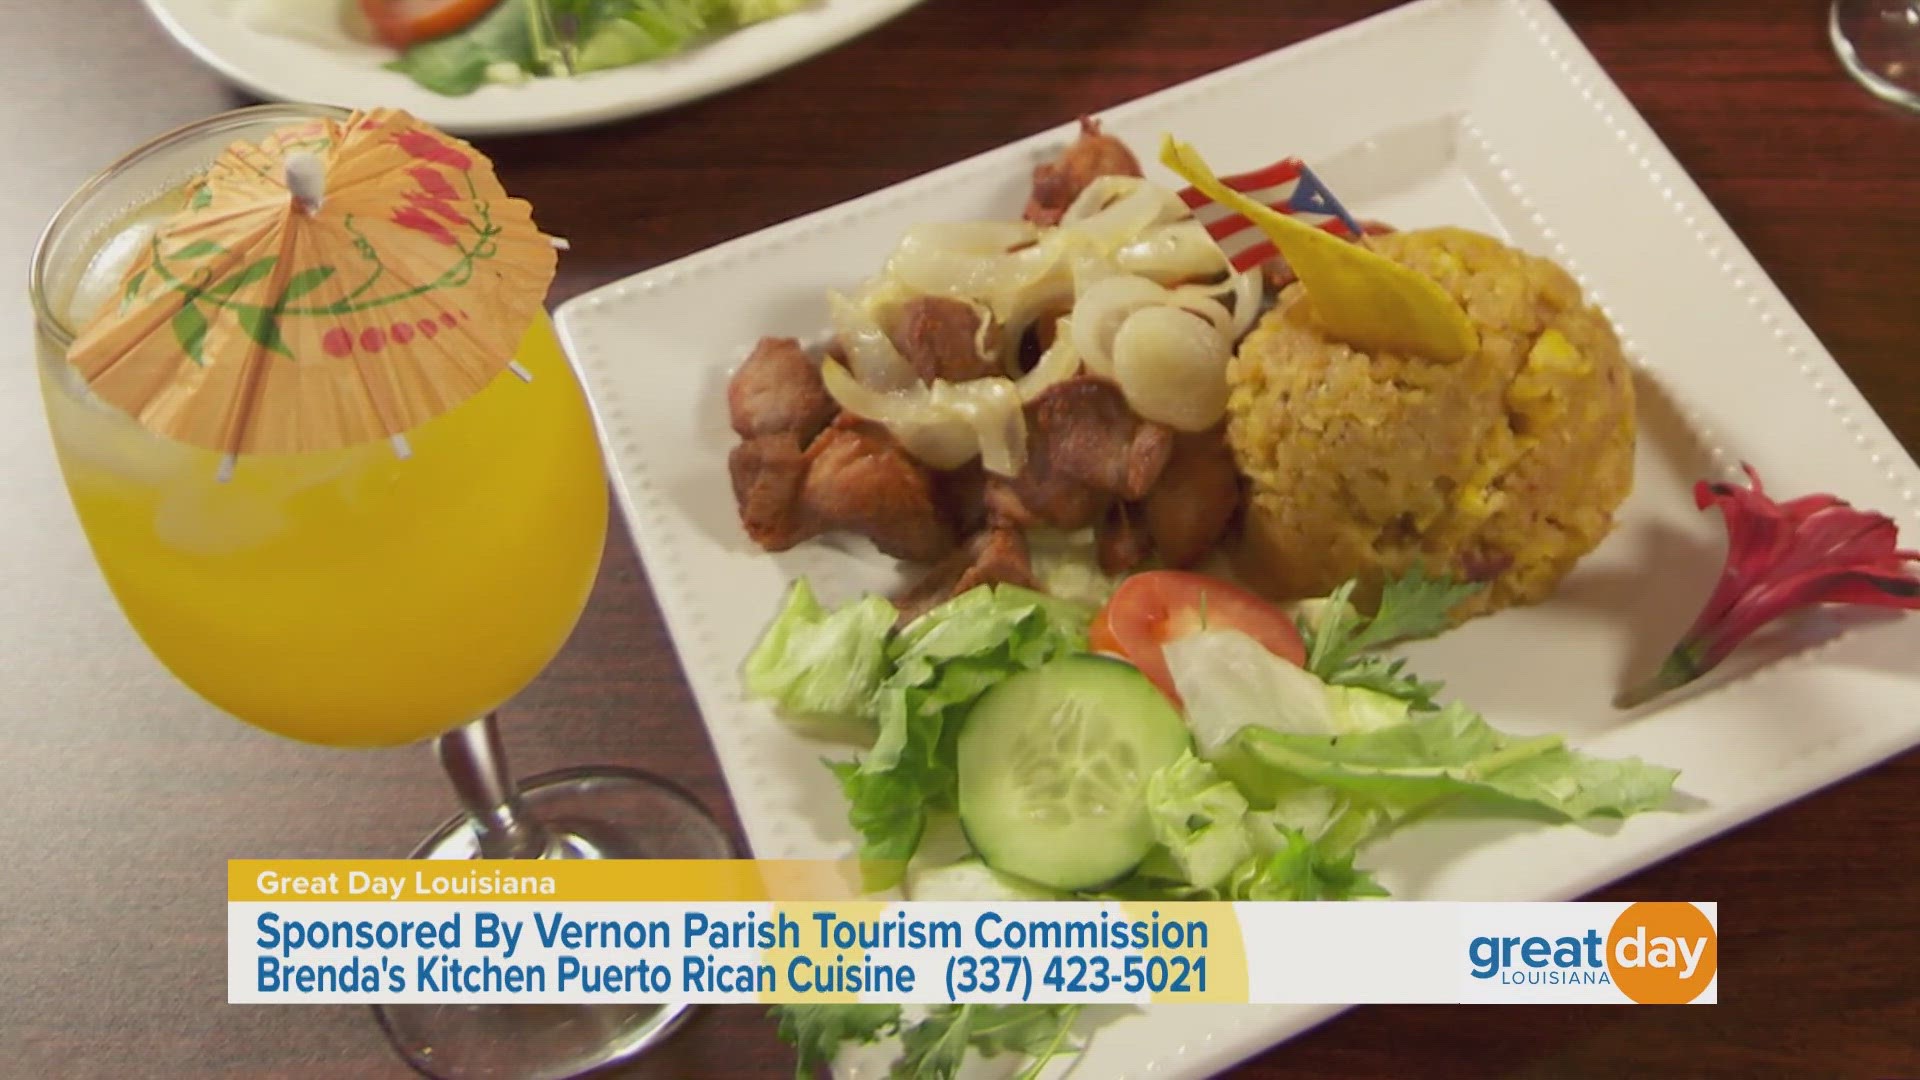 Did you know that you can taste some amazing Puerto Rican food in Leesville? Malik dines at Brenda's Kitchen!